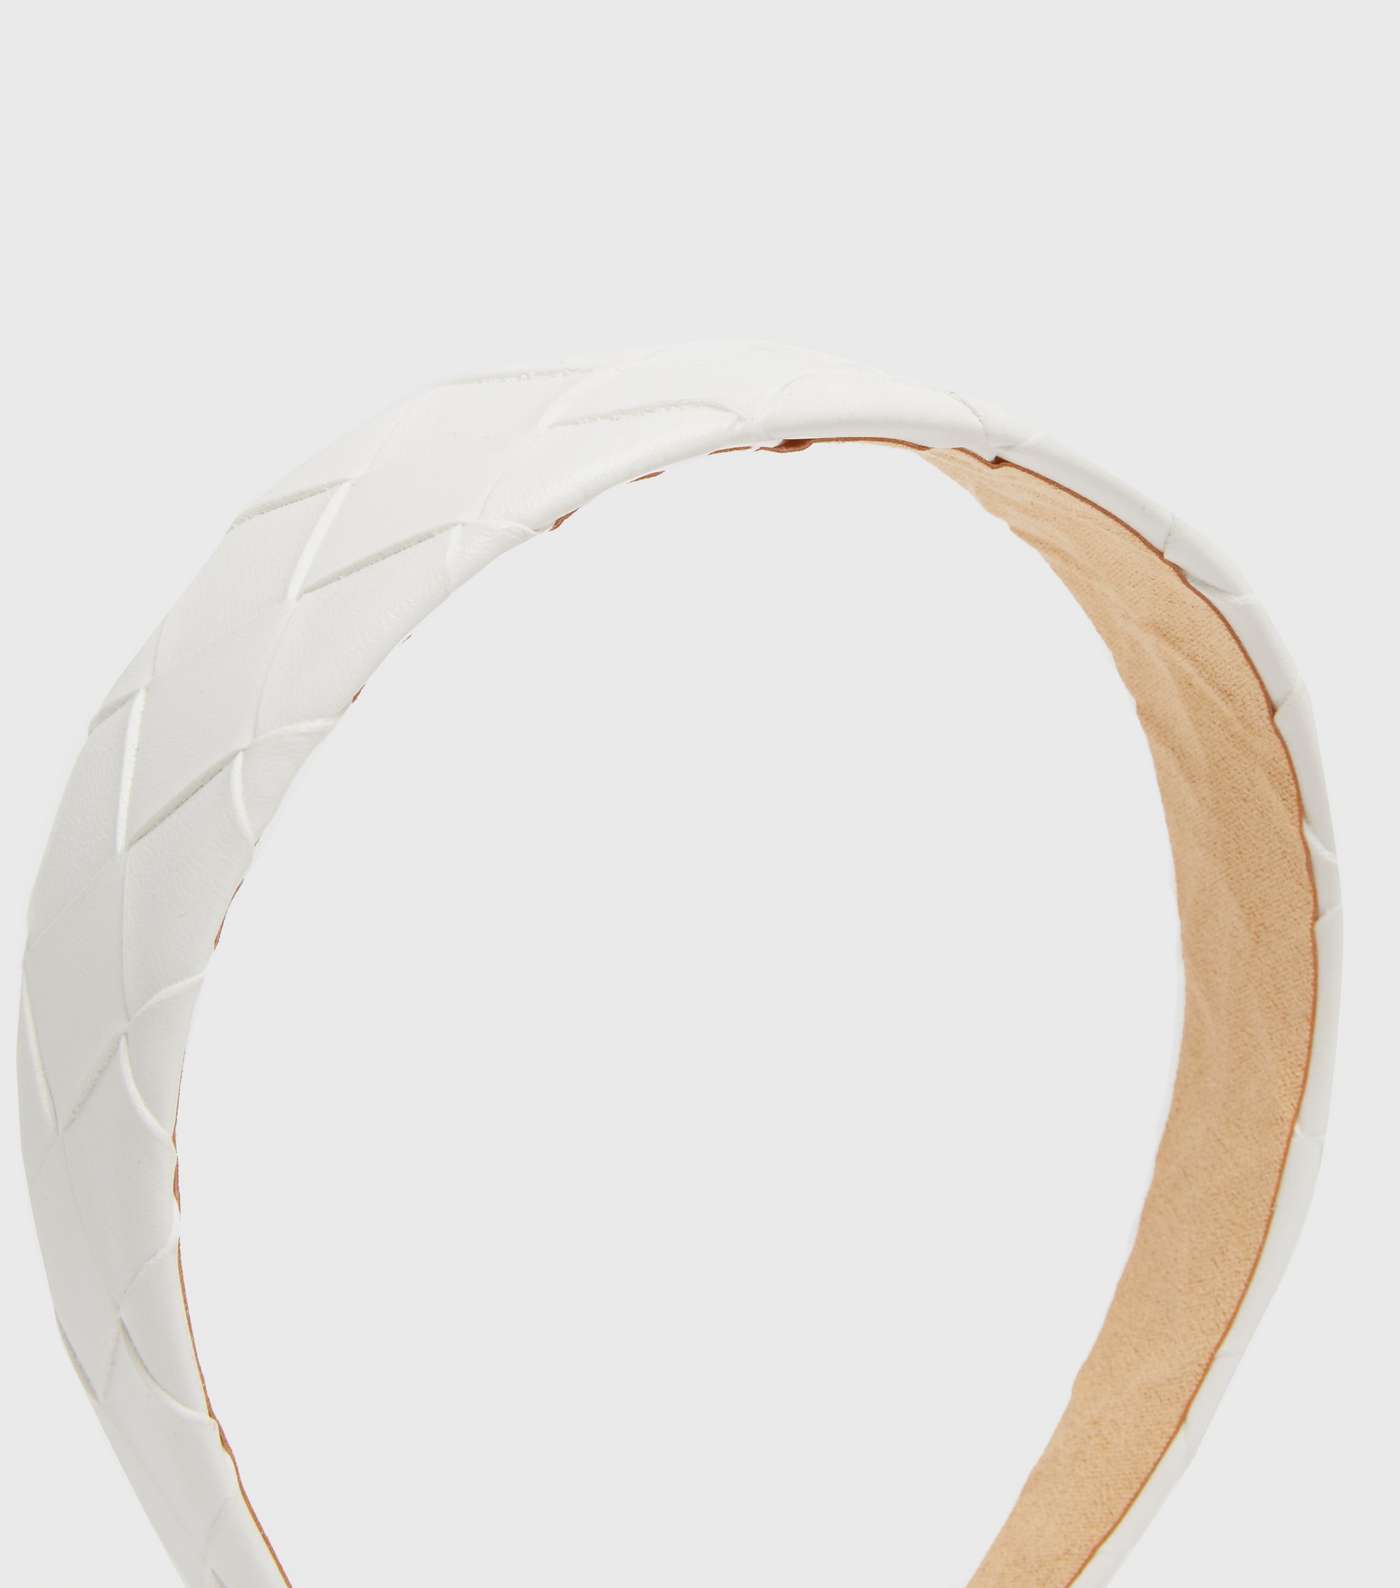 Off White Leather-Look Woven Headband  Image 2